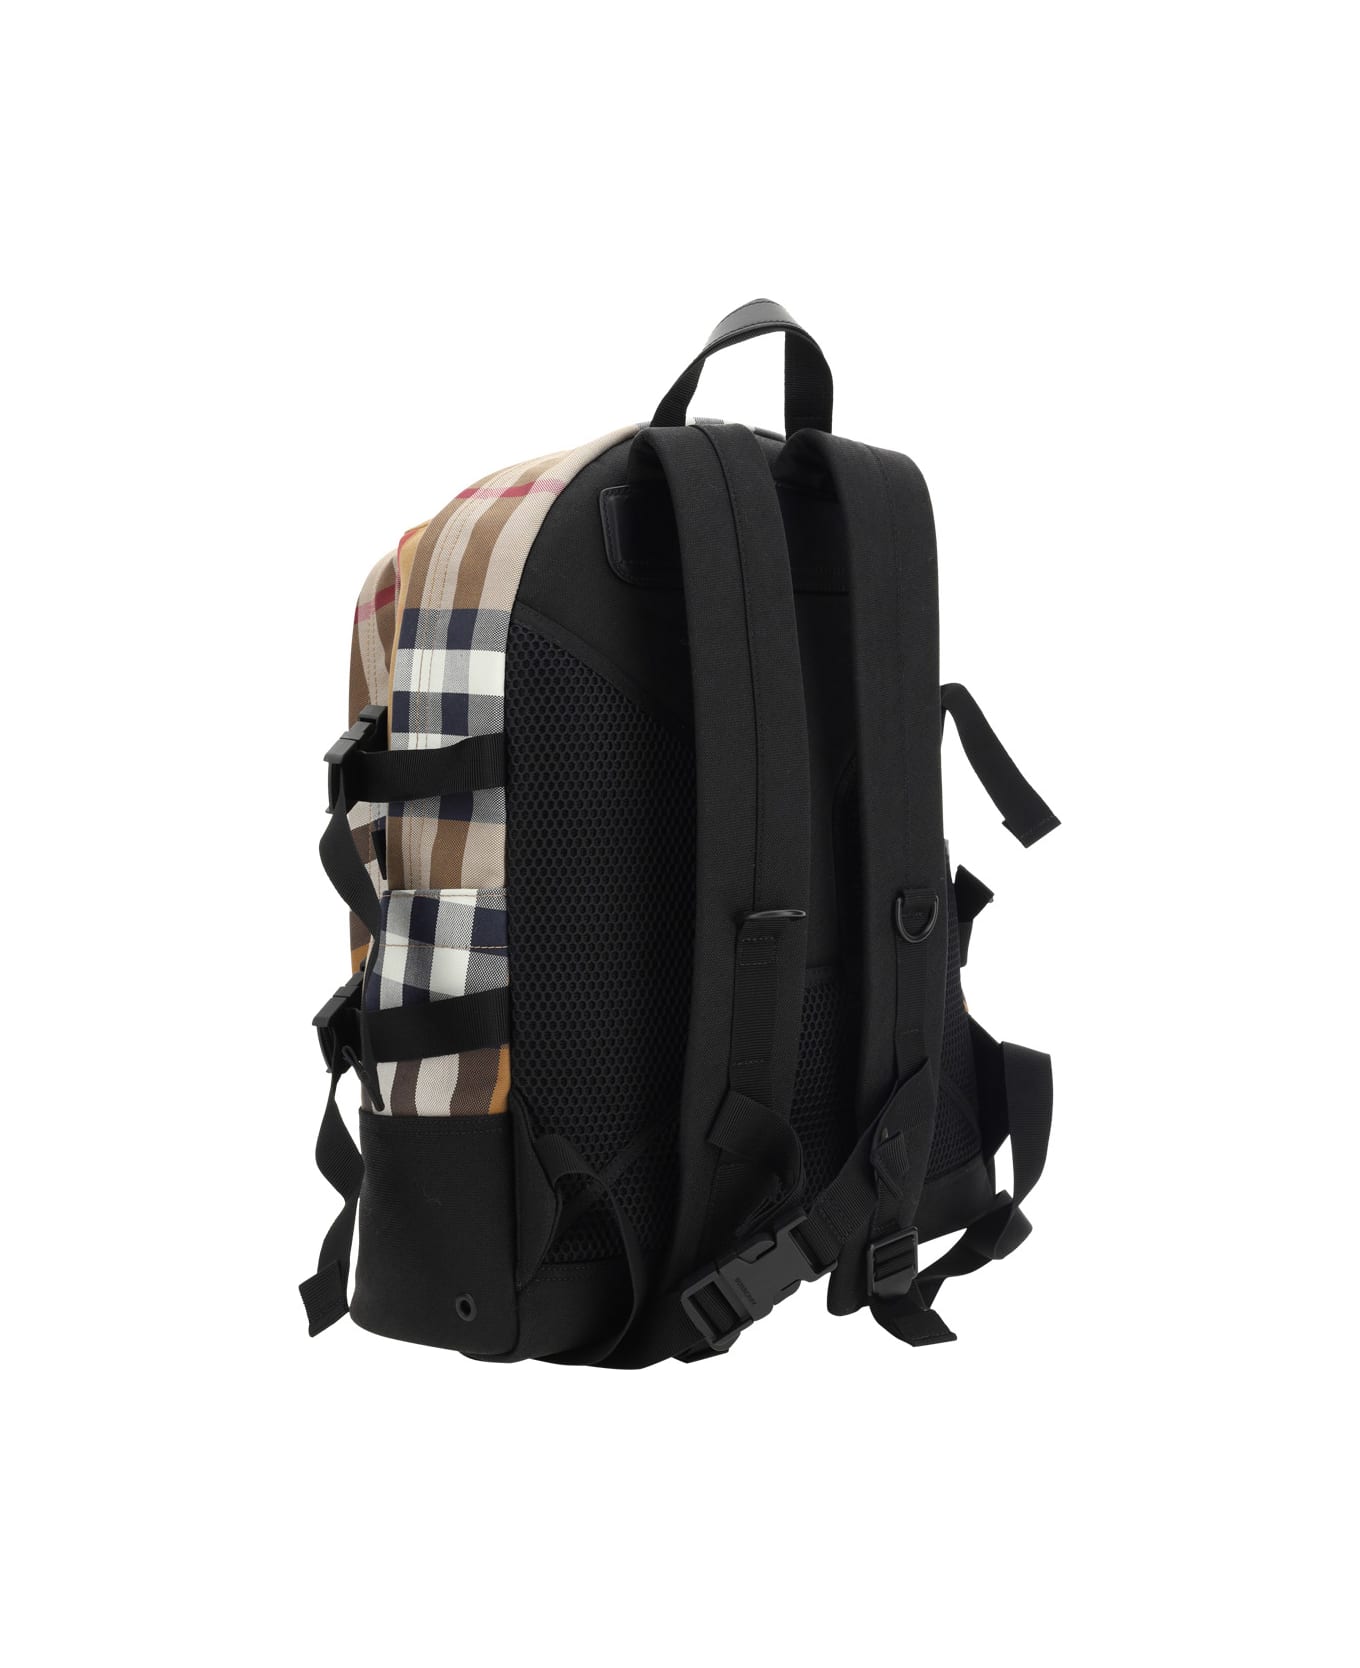 Burberry Jack Backpack - Boston grained leather bag